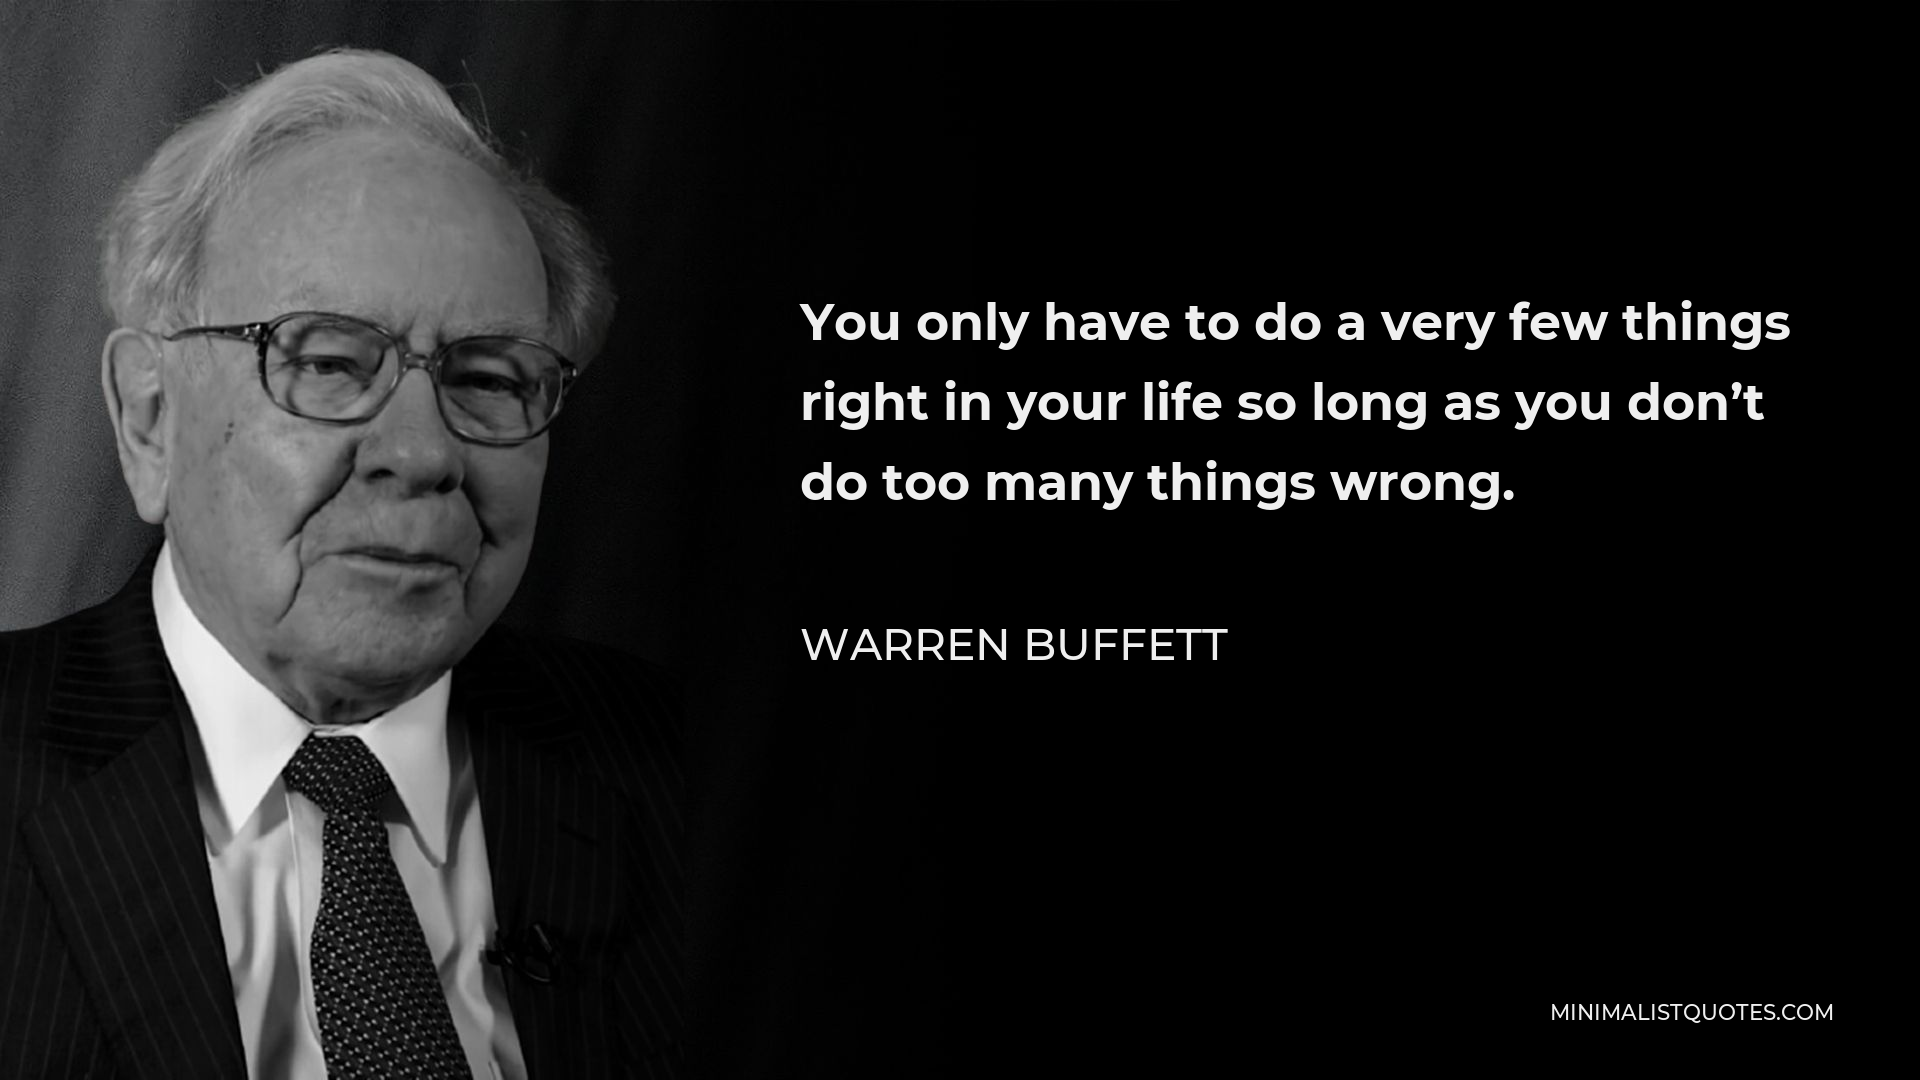 Warren Buffett Quote - You only have to do a very few things right in your life so long as you don’t do too many things wrong.